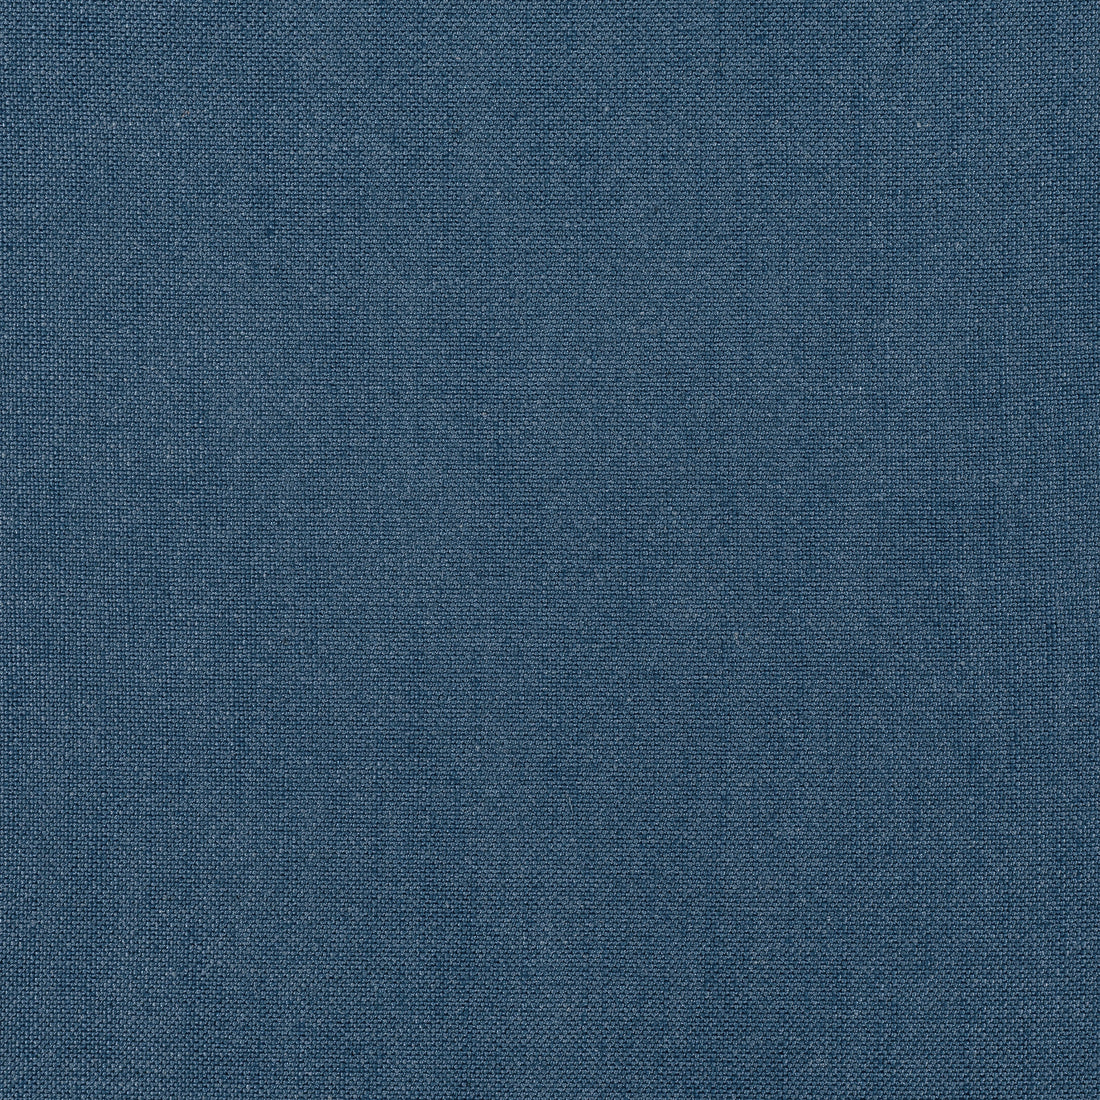 Palisade Linen fabric in navy color - pattern number FWW7641 - by Thibaut in the Palisades collection